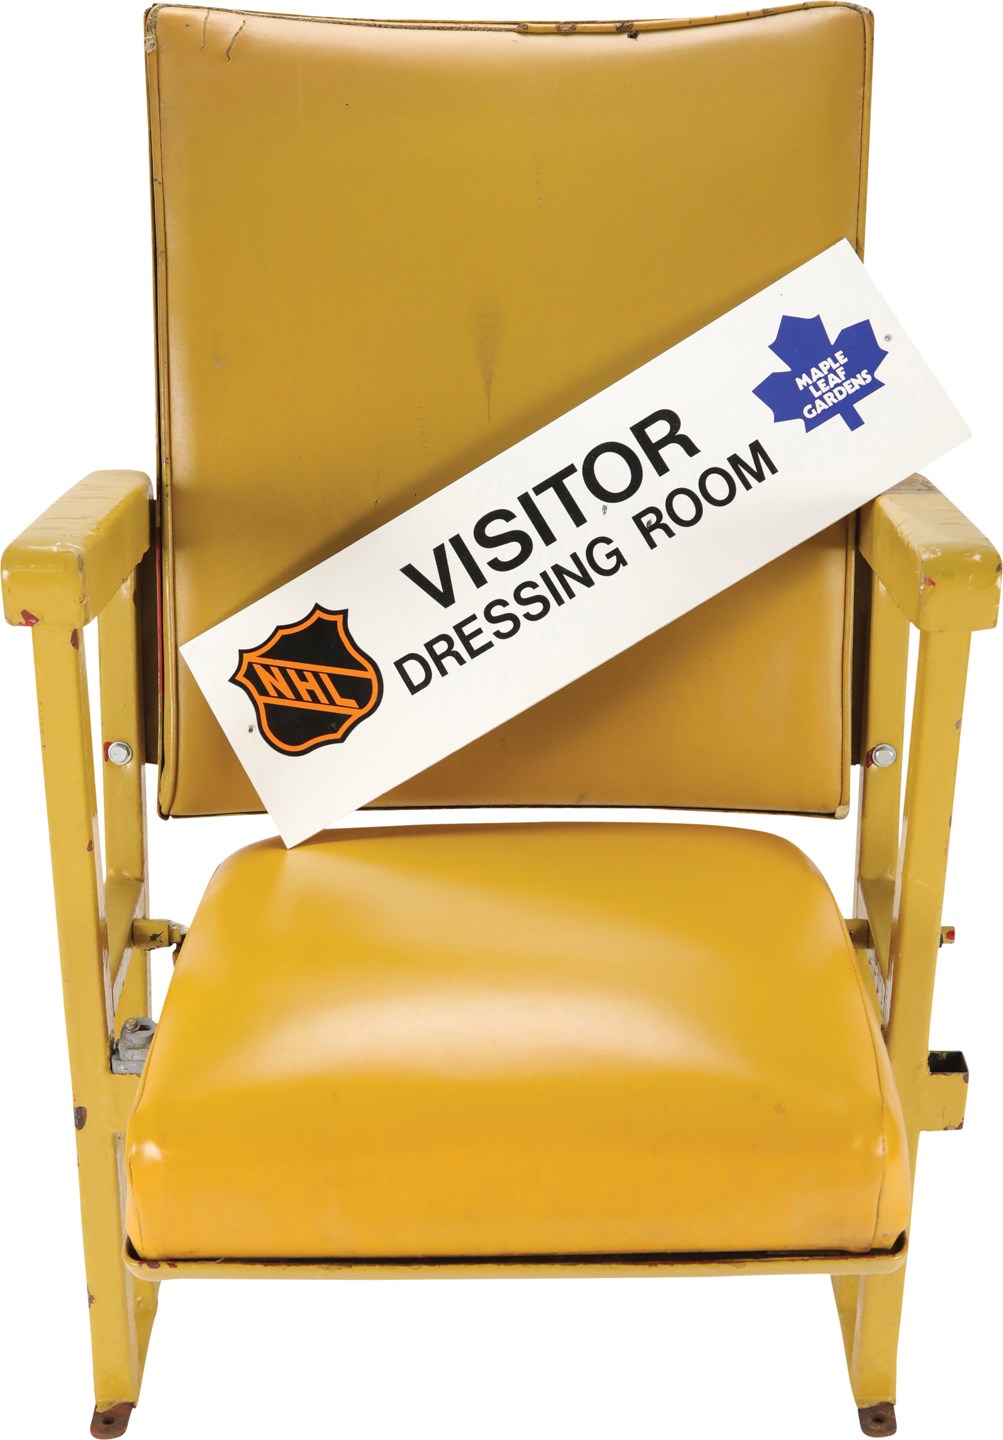 - Maple Leaf Gardens Seat and Locker Room Sign